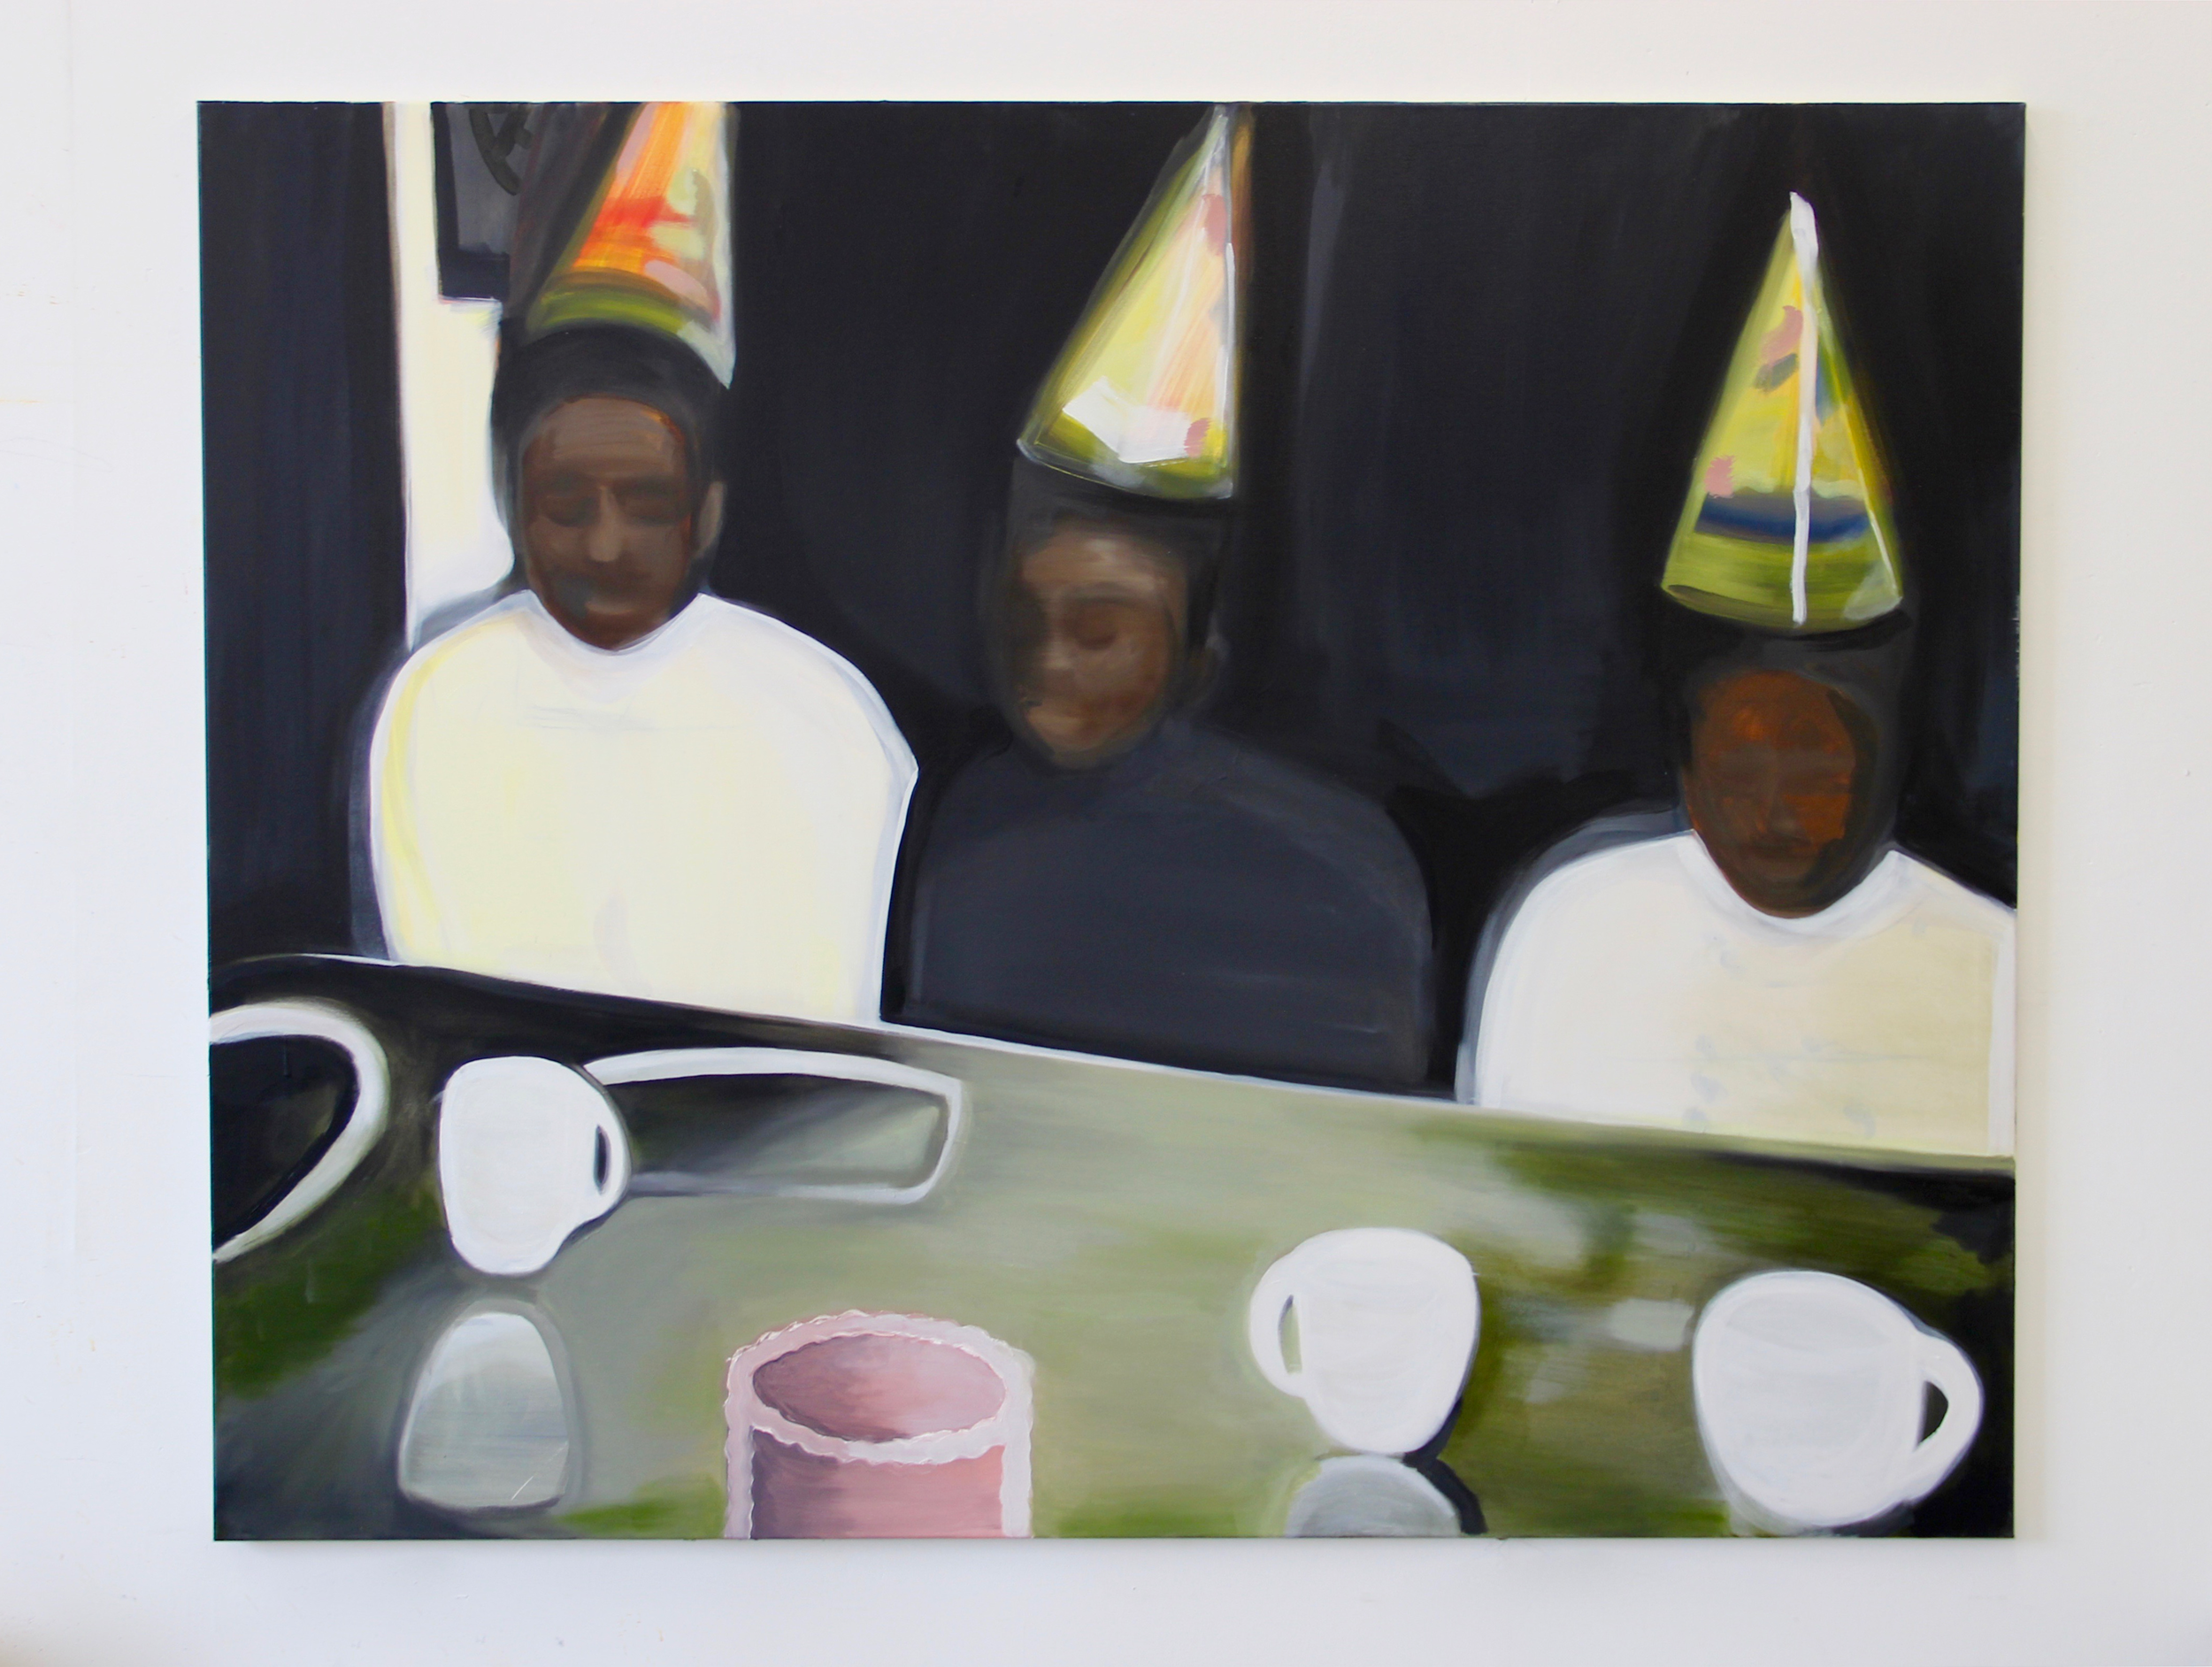   Birthday Party , 2018 Oil on canvas 48 x 60 inches 